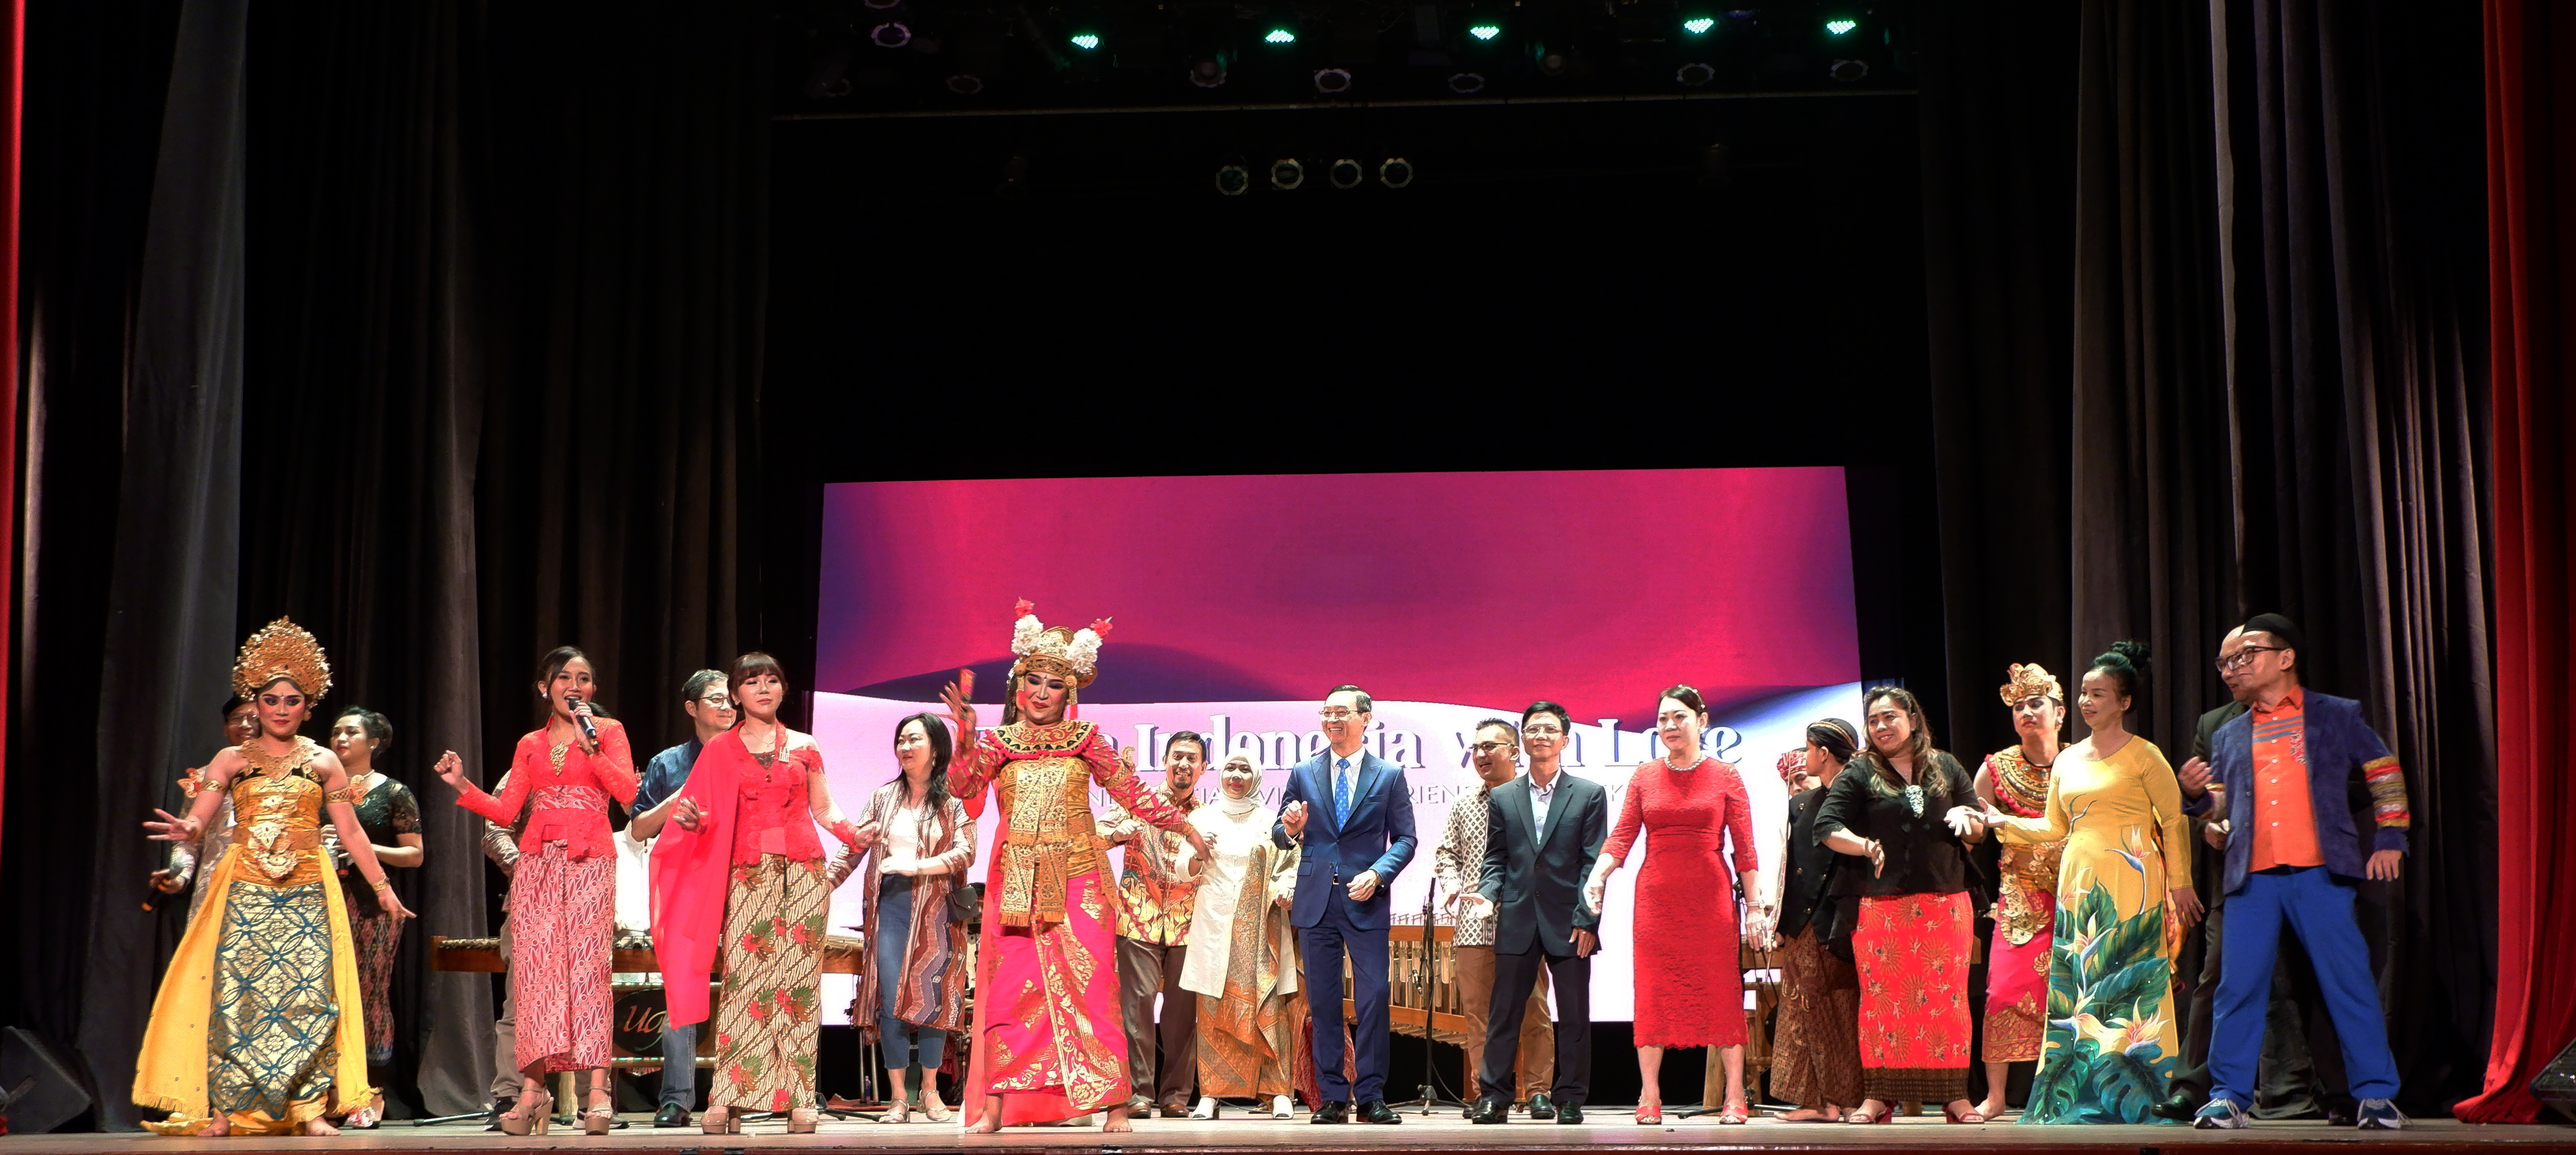 Consul General of Indonesia in Ho Chi Minh City Agustaviano Sofjan and his spouse, Director of the Ho Chi Minh City Department of Foreign Affairs Tran Phuoc Anh, Indonesian artists and other guests do an Indonesian traditional dance at the end of the show. Photo: Hong Ngan / Tuoi Tre News